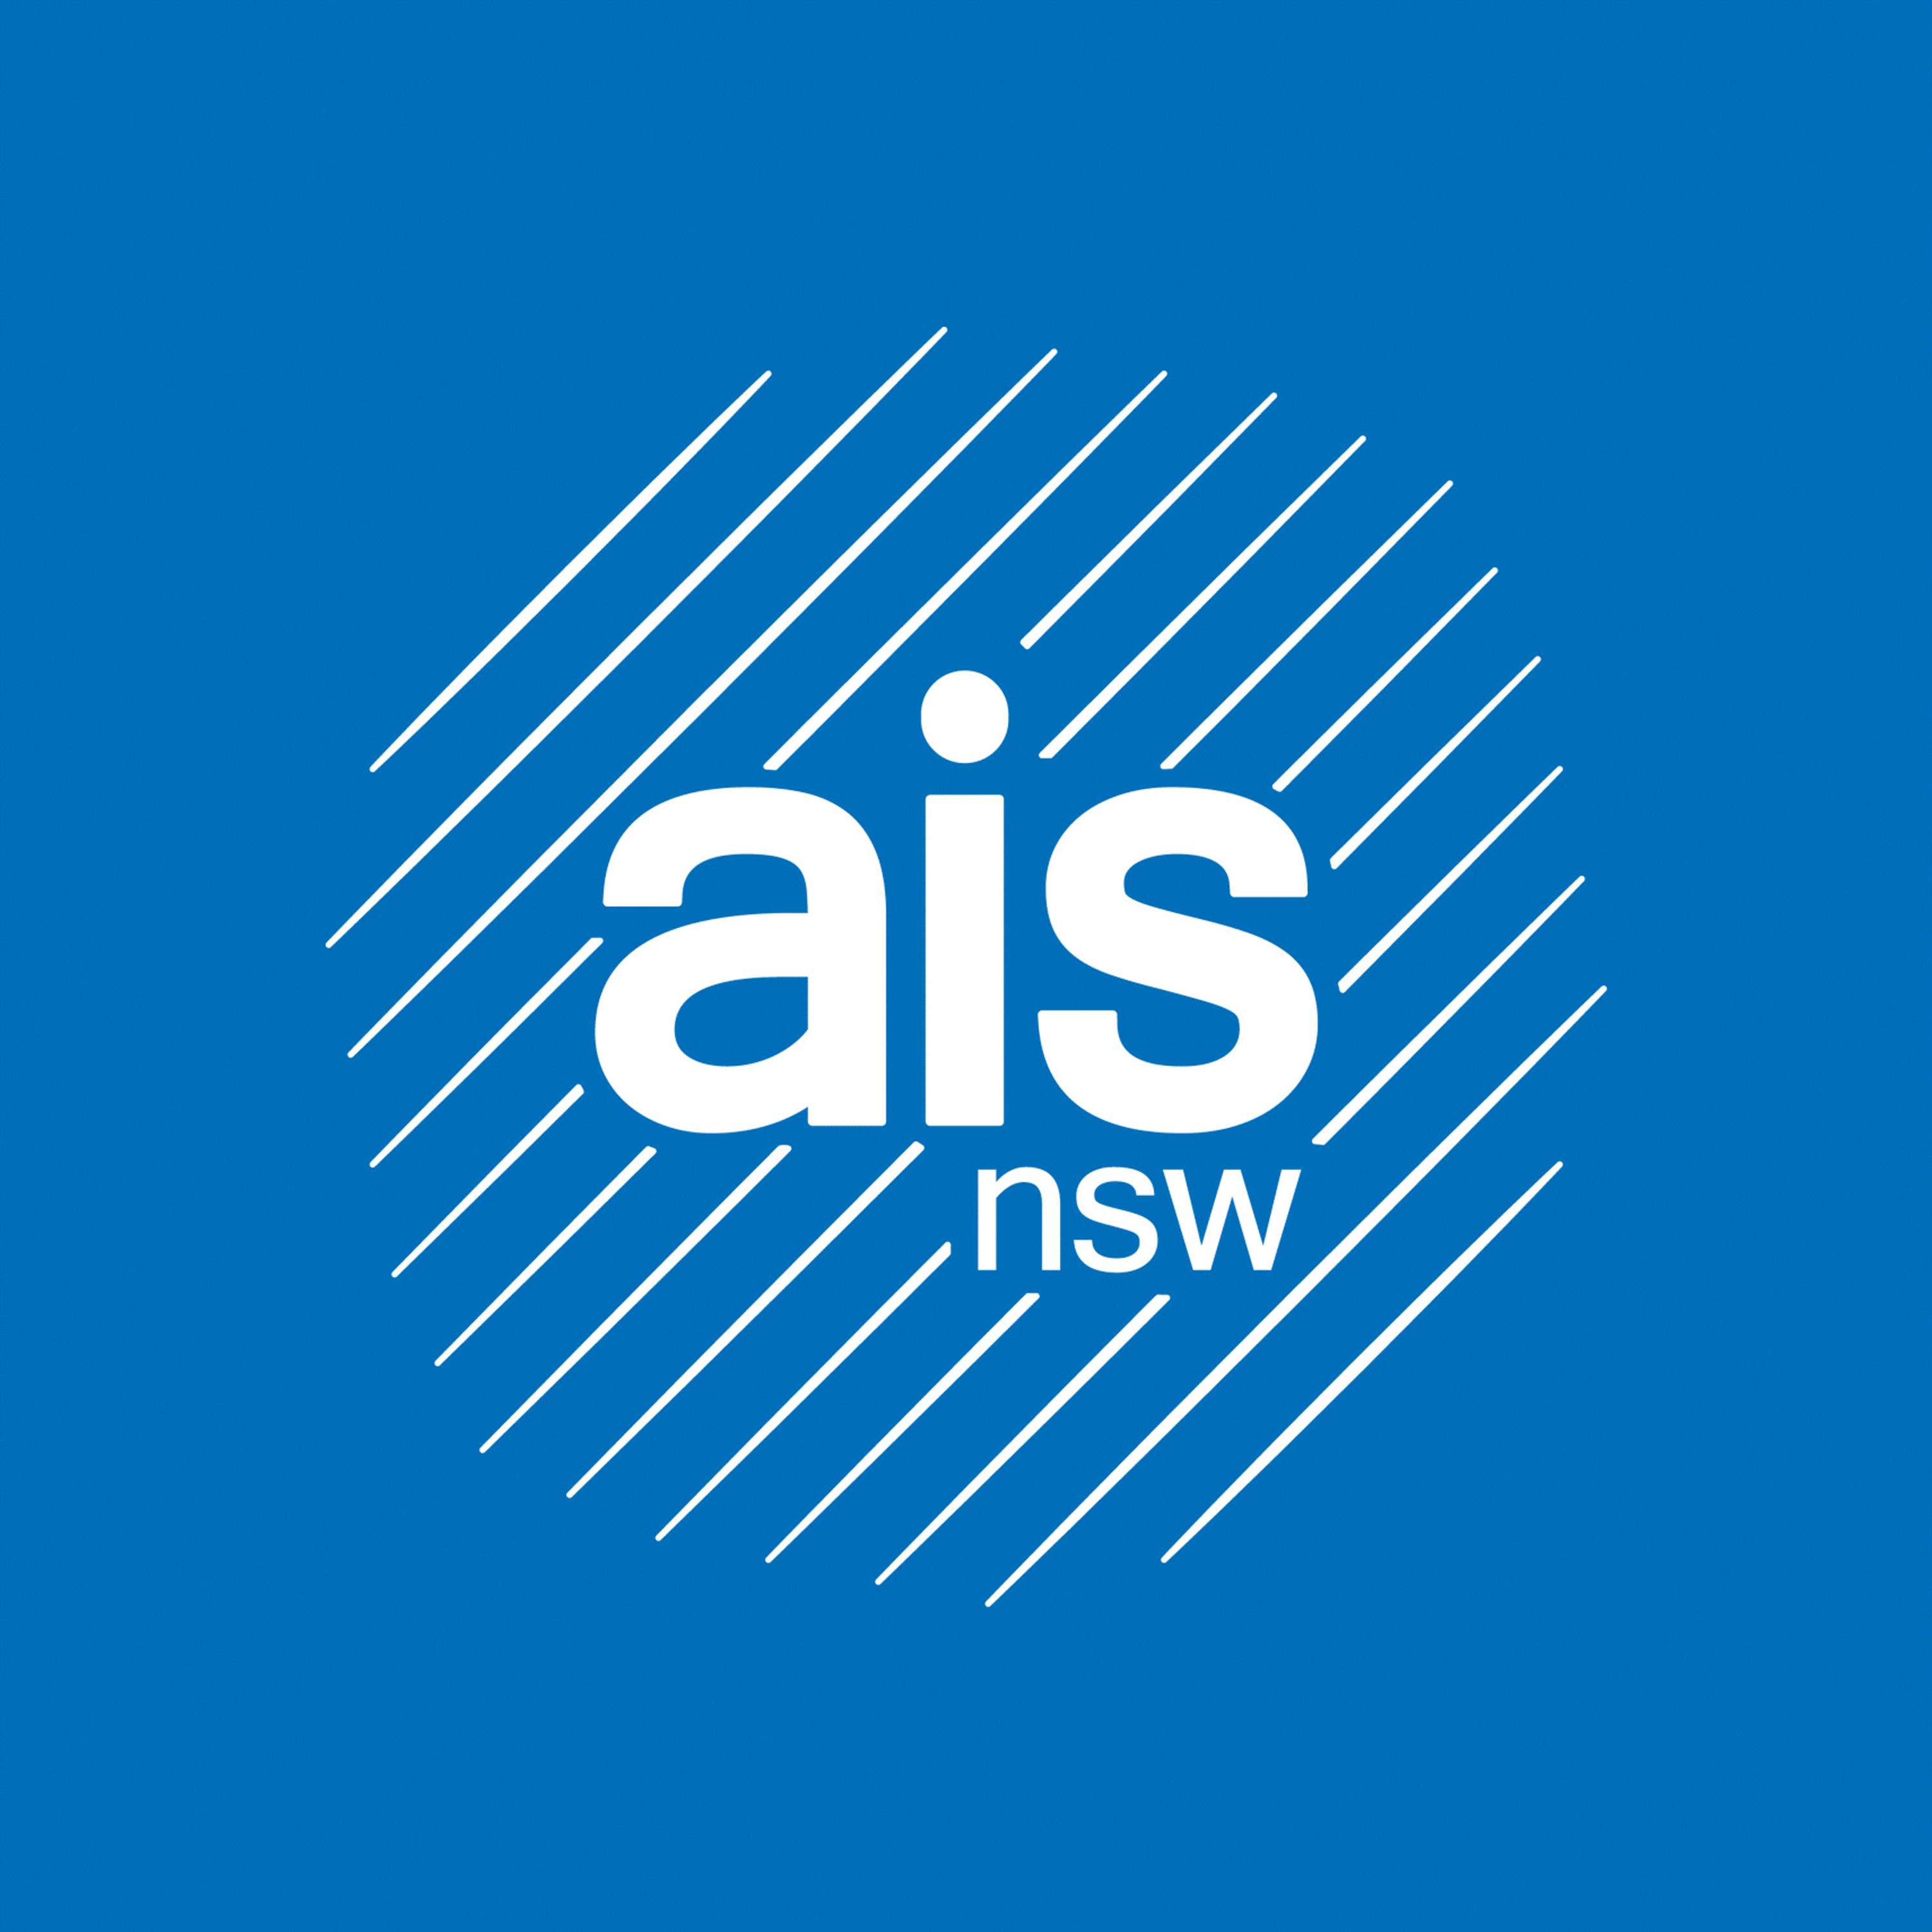 Introducing the AISNSW Creating Cohesive Communities Podcast